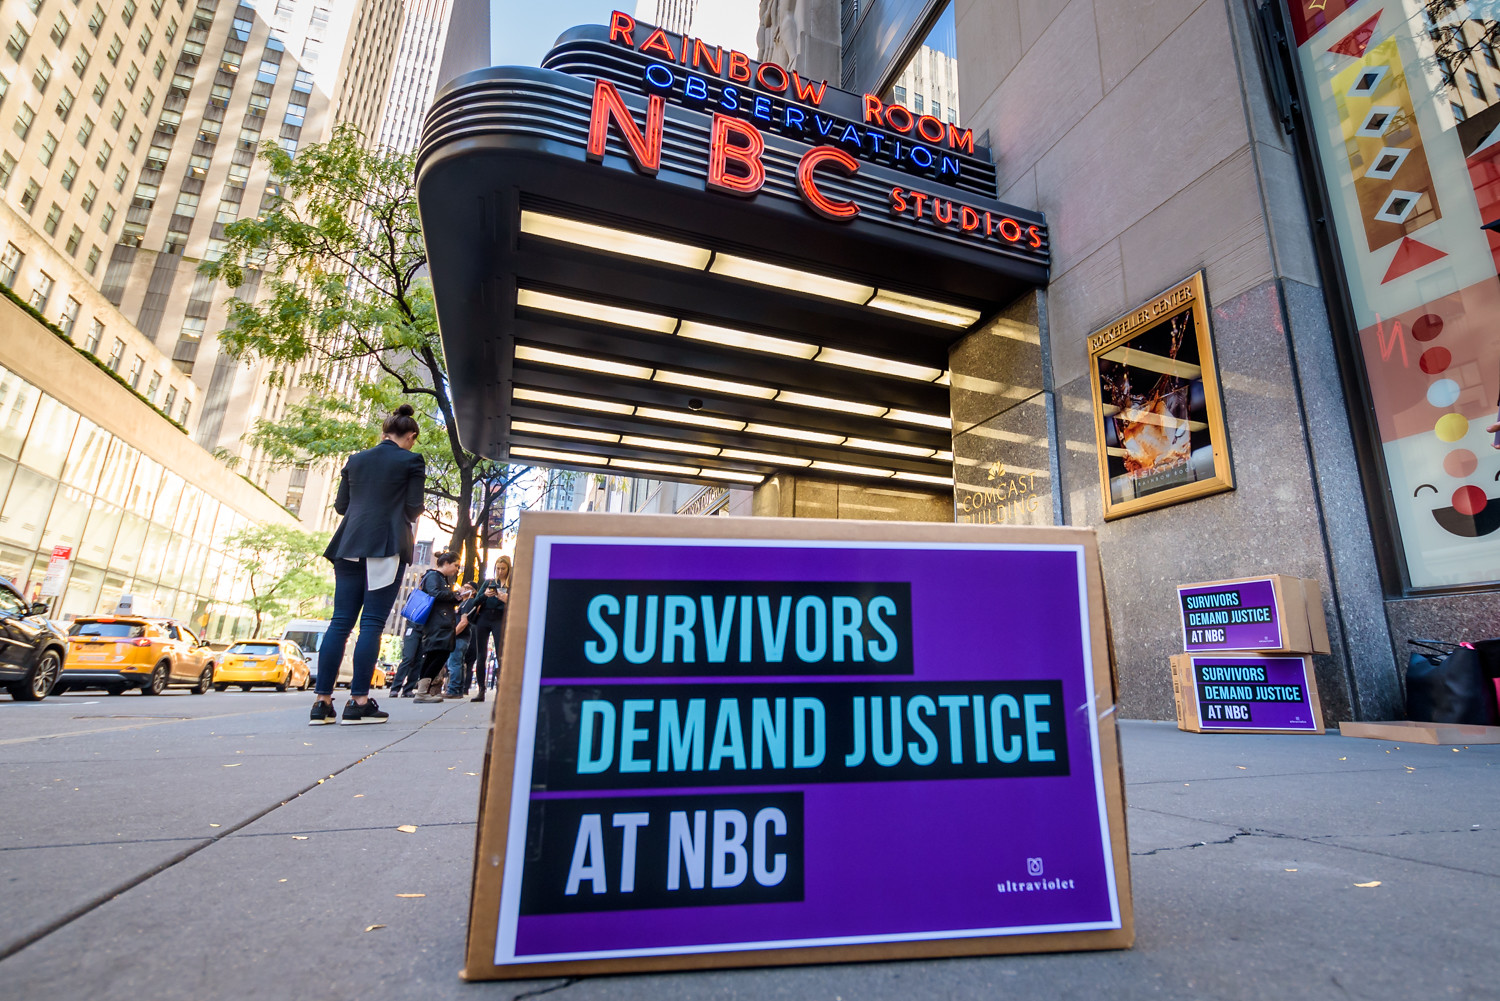 Box labeled "Survivors Demand Justice at NBC" sits in front of the exterior of NBC's 30 Rock